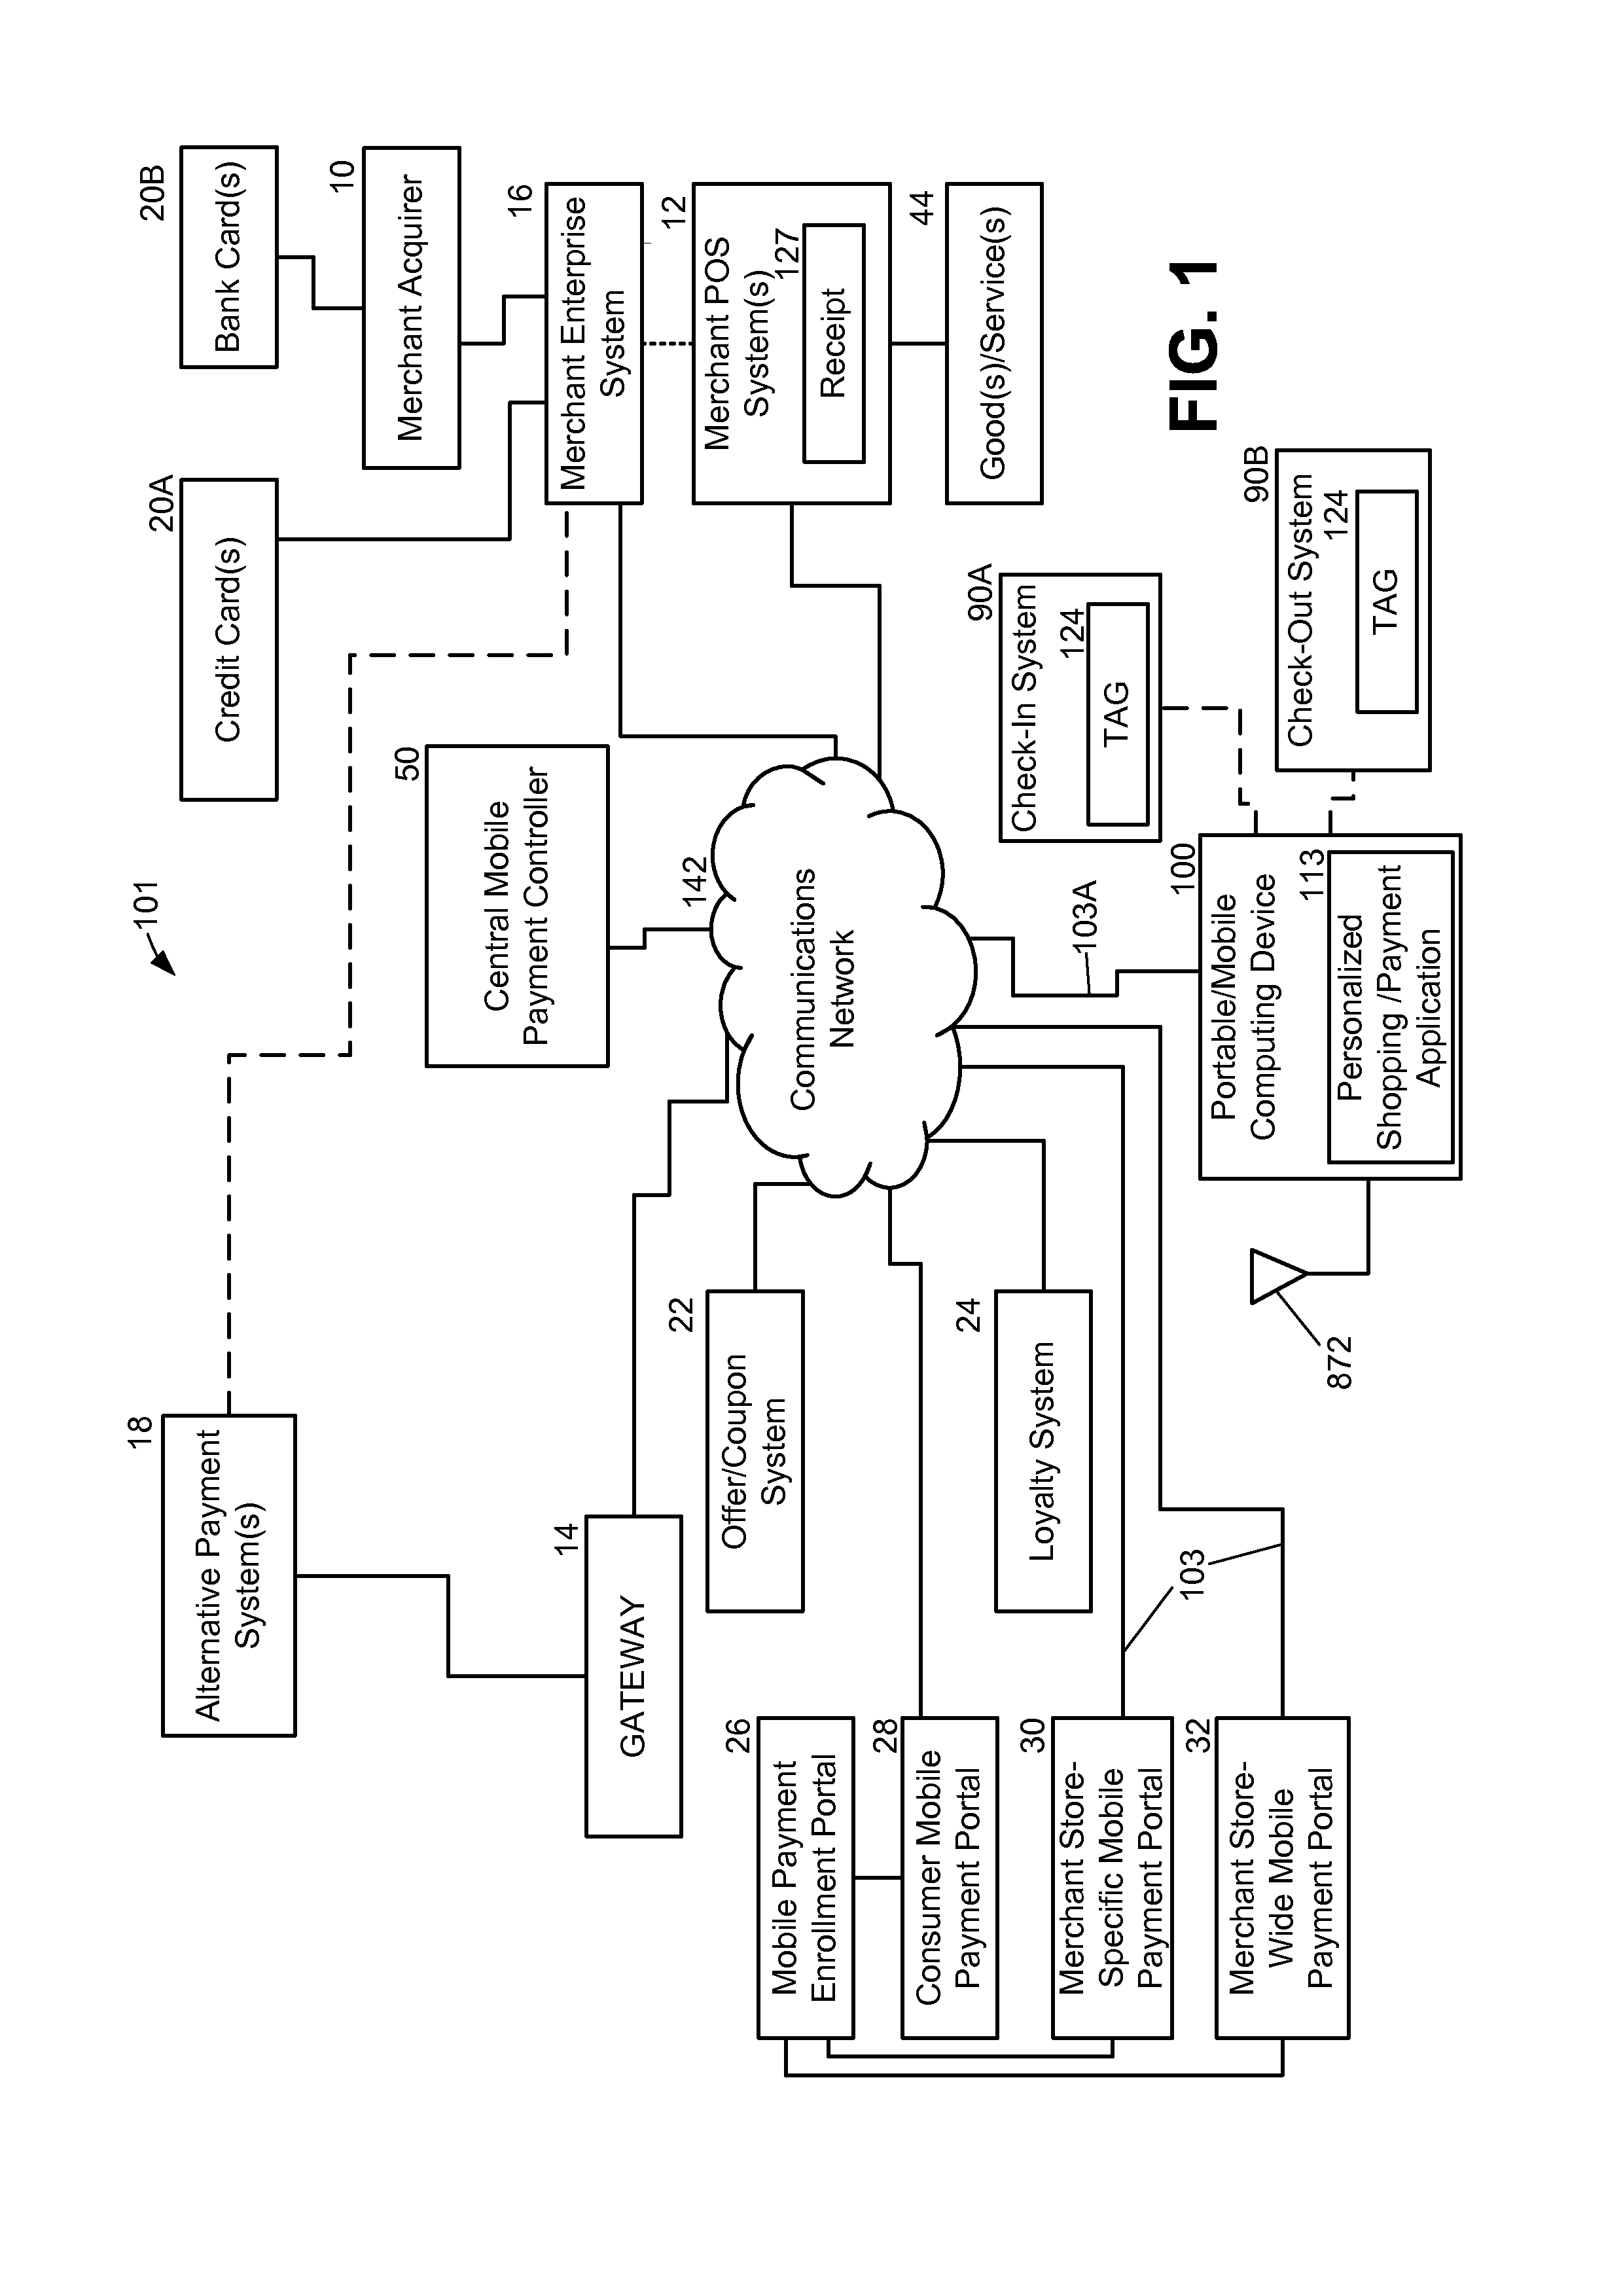 System and Method For Providing A Personalized Shopping Experience and Personalized Pricing of Products and Services With A Portable Computing Device